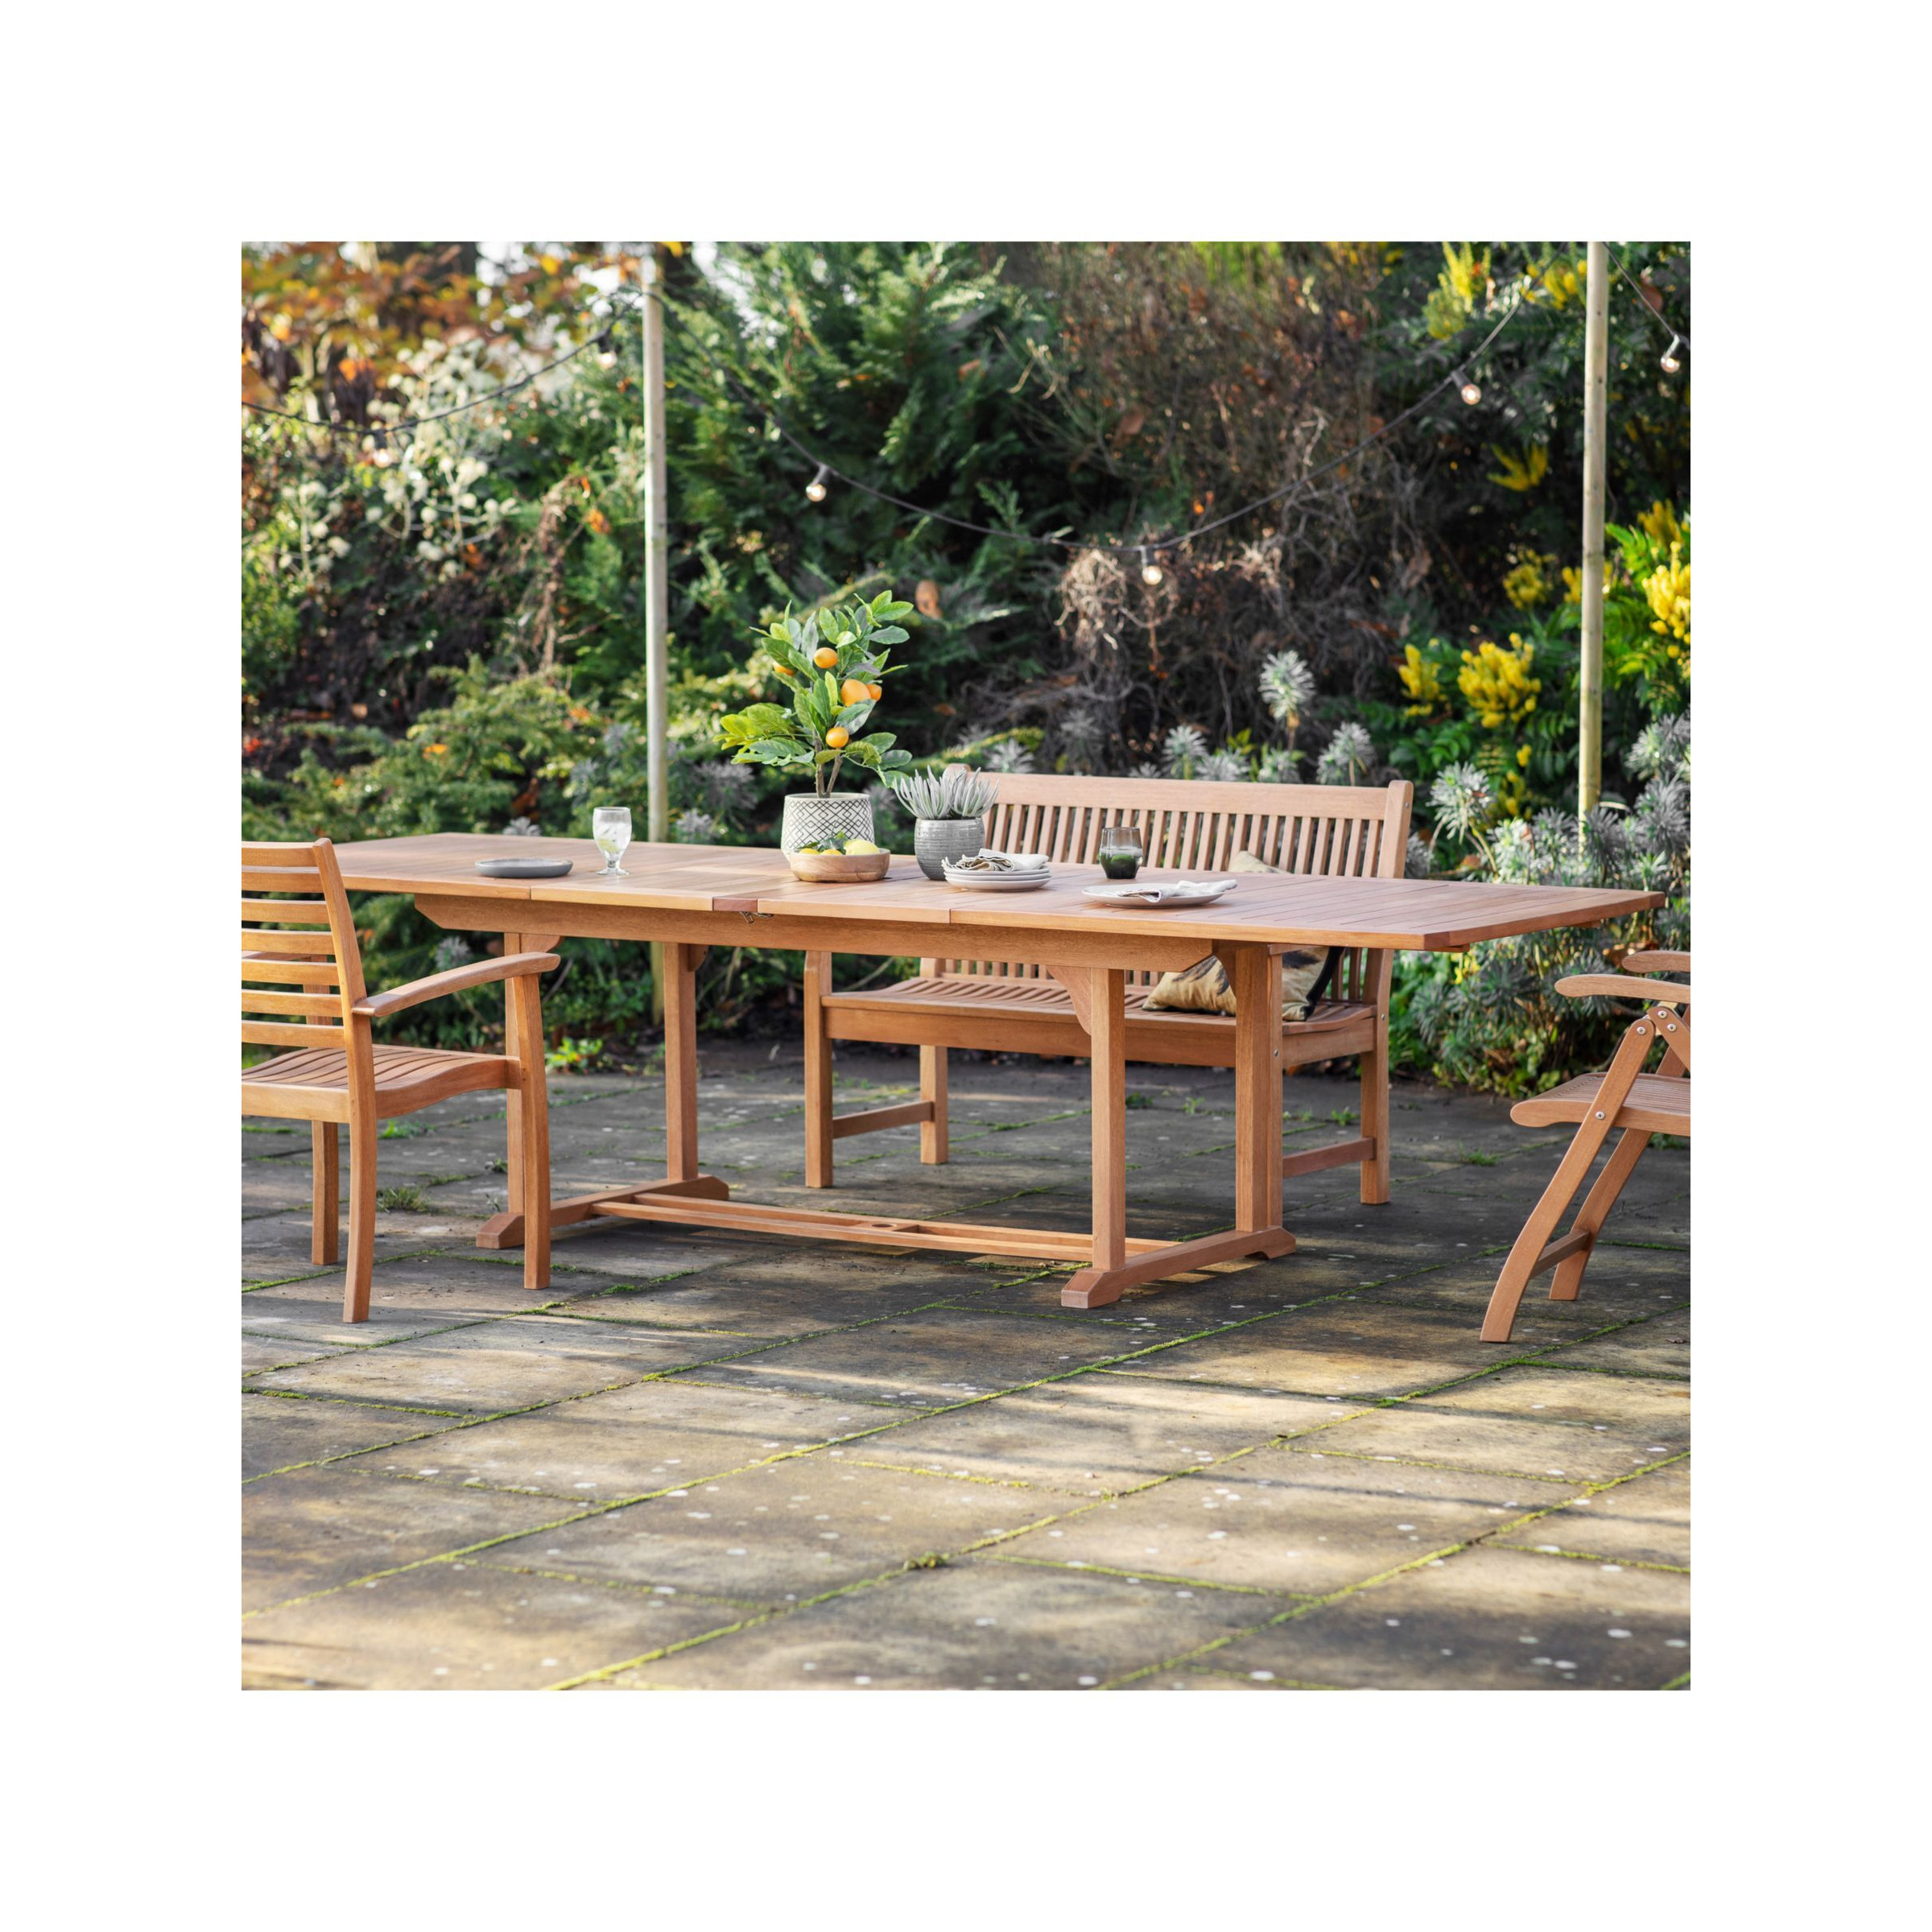 Gallery Direct Marconi Wood Garden Extending Dining Table, Natural - image 1